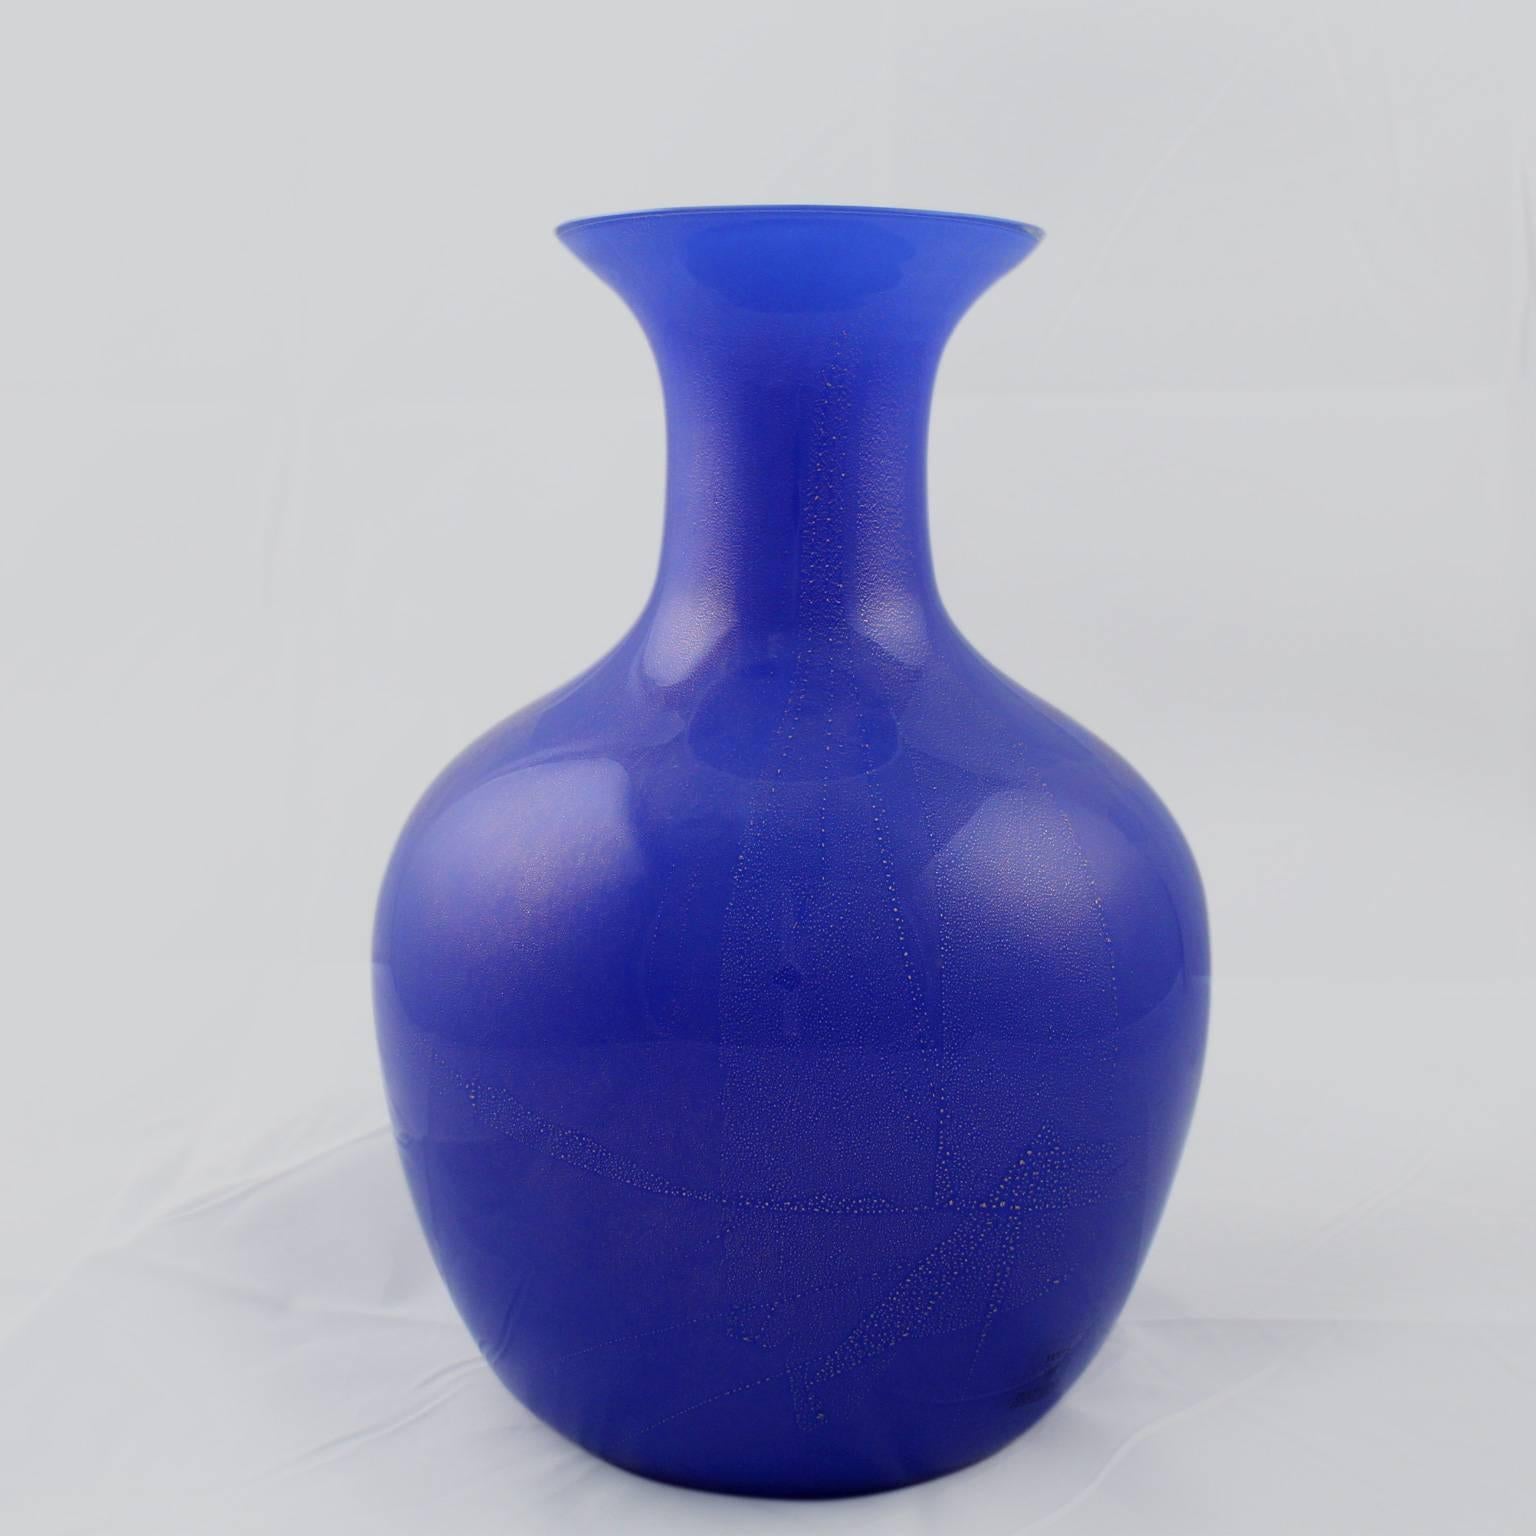 A large Vetri Murano Salviati blue glass vase with inclusions. 

The vase bears Vetri Murano and Salviati & Co. labels.

Height: circa 12.75 in. 

Items purchased from David Sterner antiques must delight you. Purchases may be returned for any